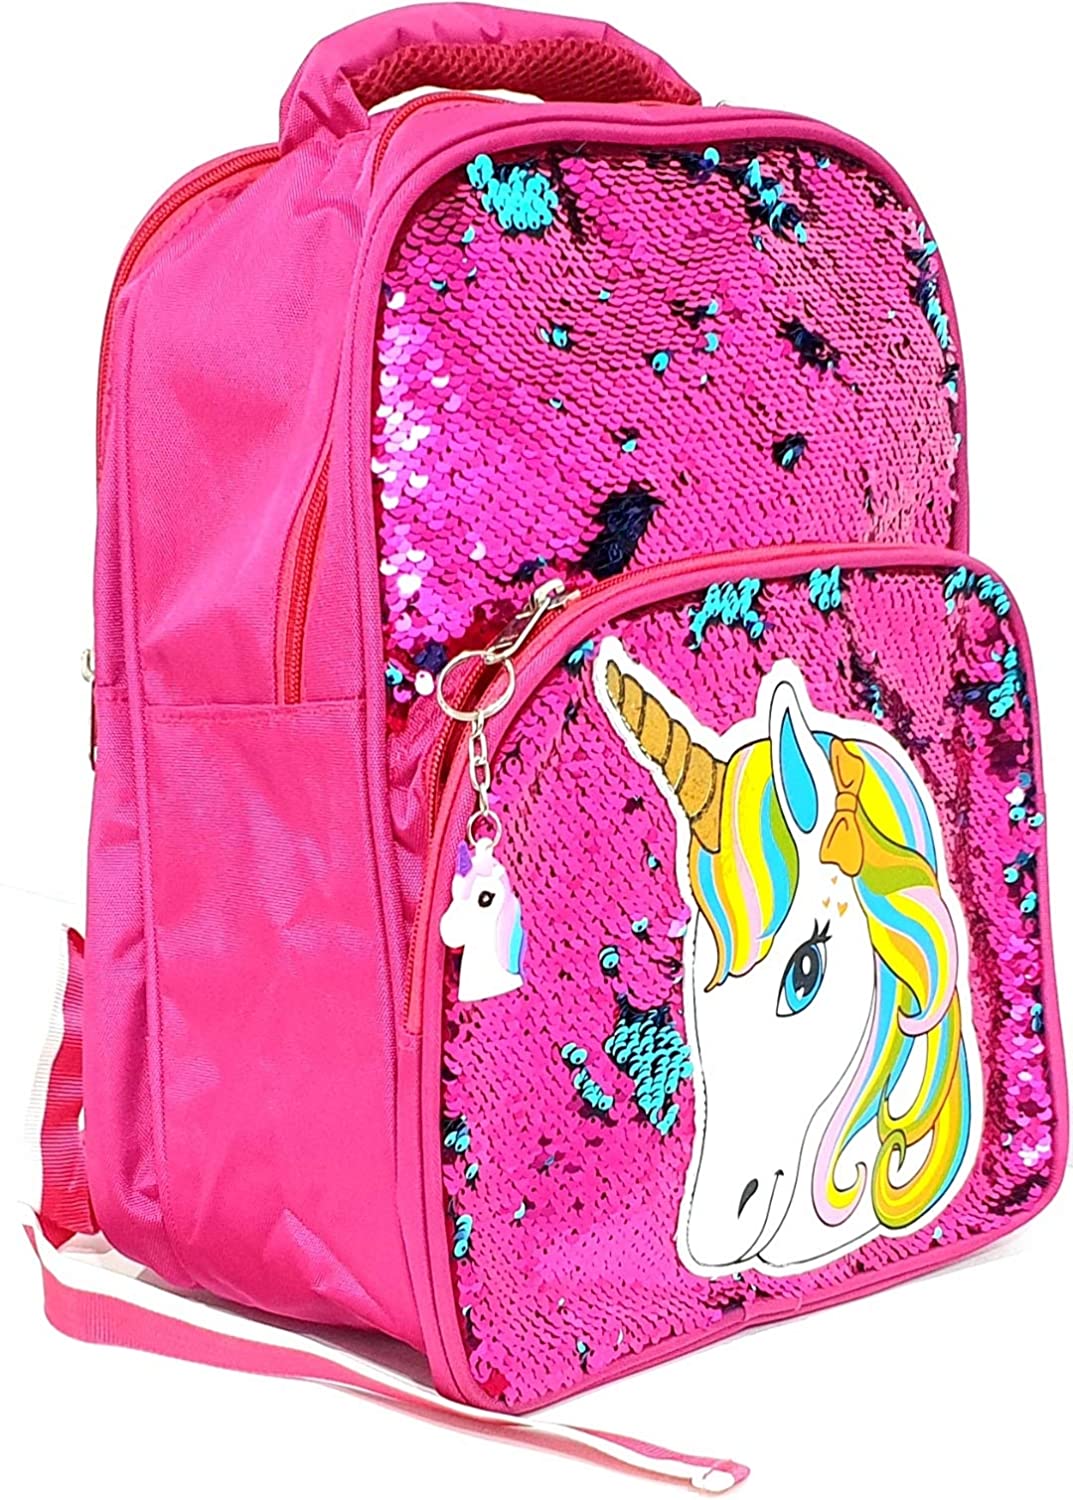 LIGHTER HOUSE� Girl Sequin Unicorn Travel Crossbody Shoulder Bag Coin Purse  for Little Girl - BIG SIZE Length - 8 Inch x Width- 6 Inch(ASSORTED COLOUR)  : Amazon.in: Bags, Wallets and Luggage